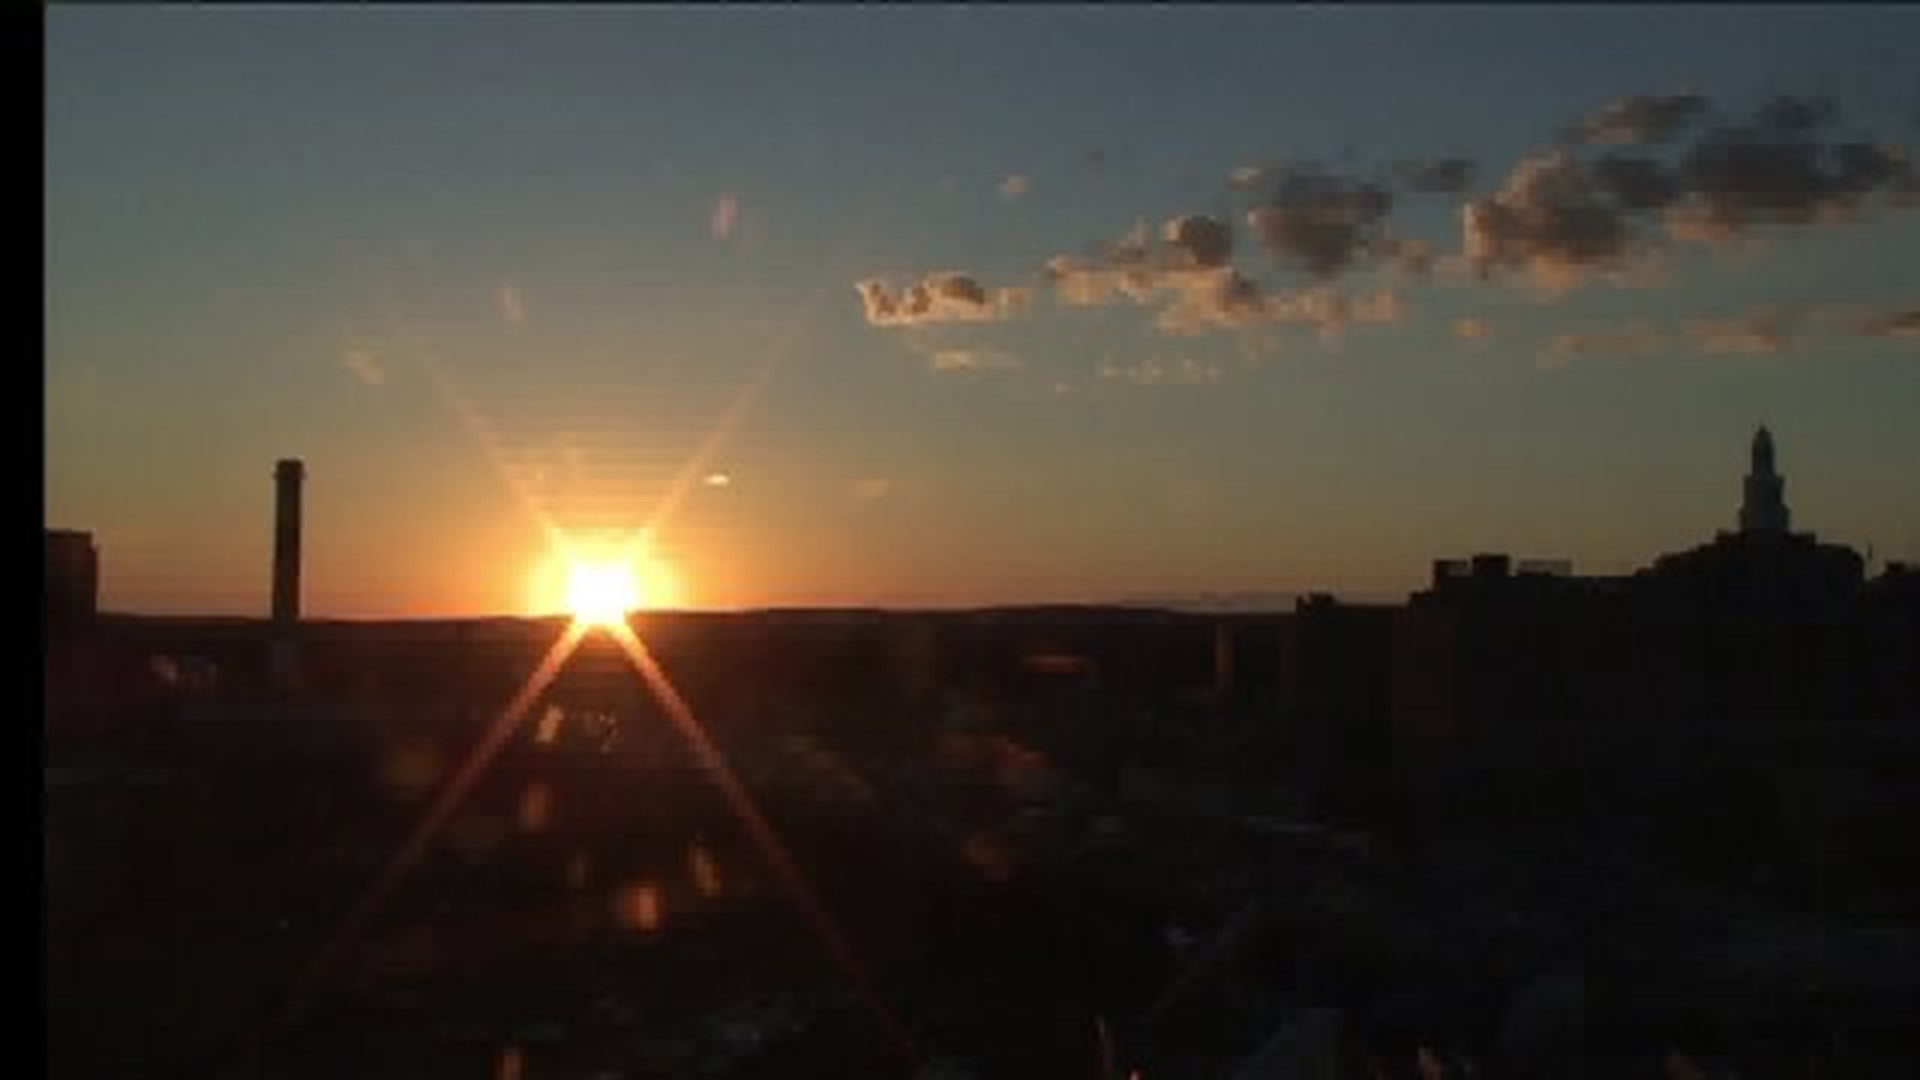 An end to Daylight Saving Time in Connecticut?